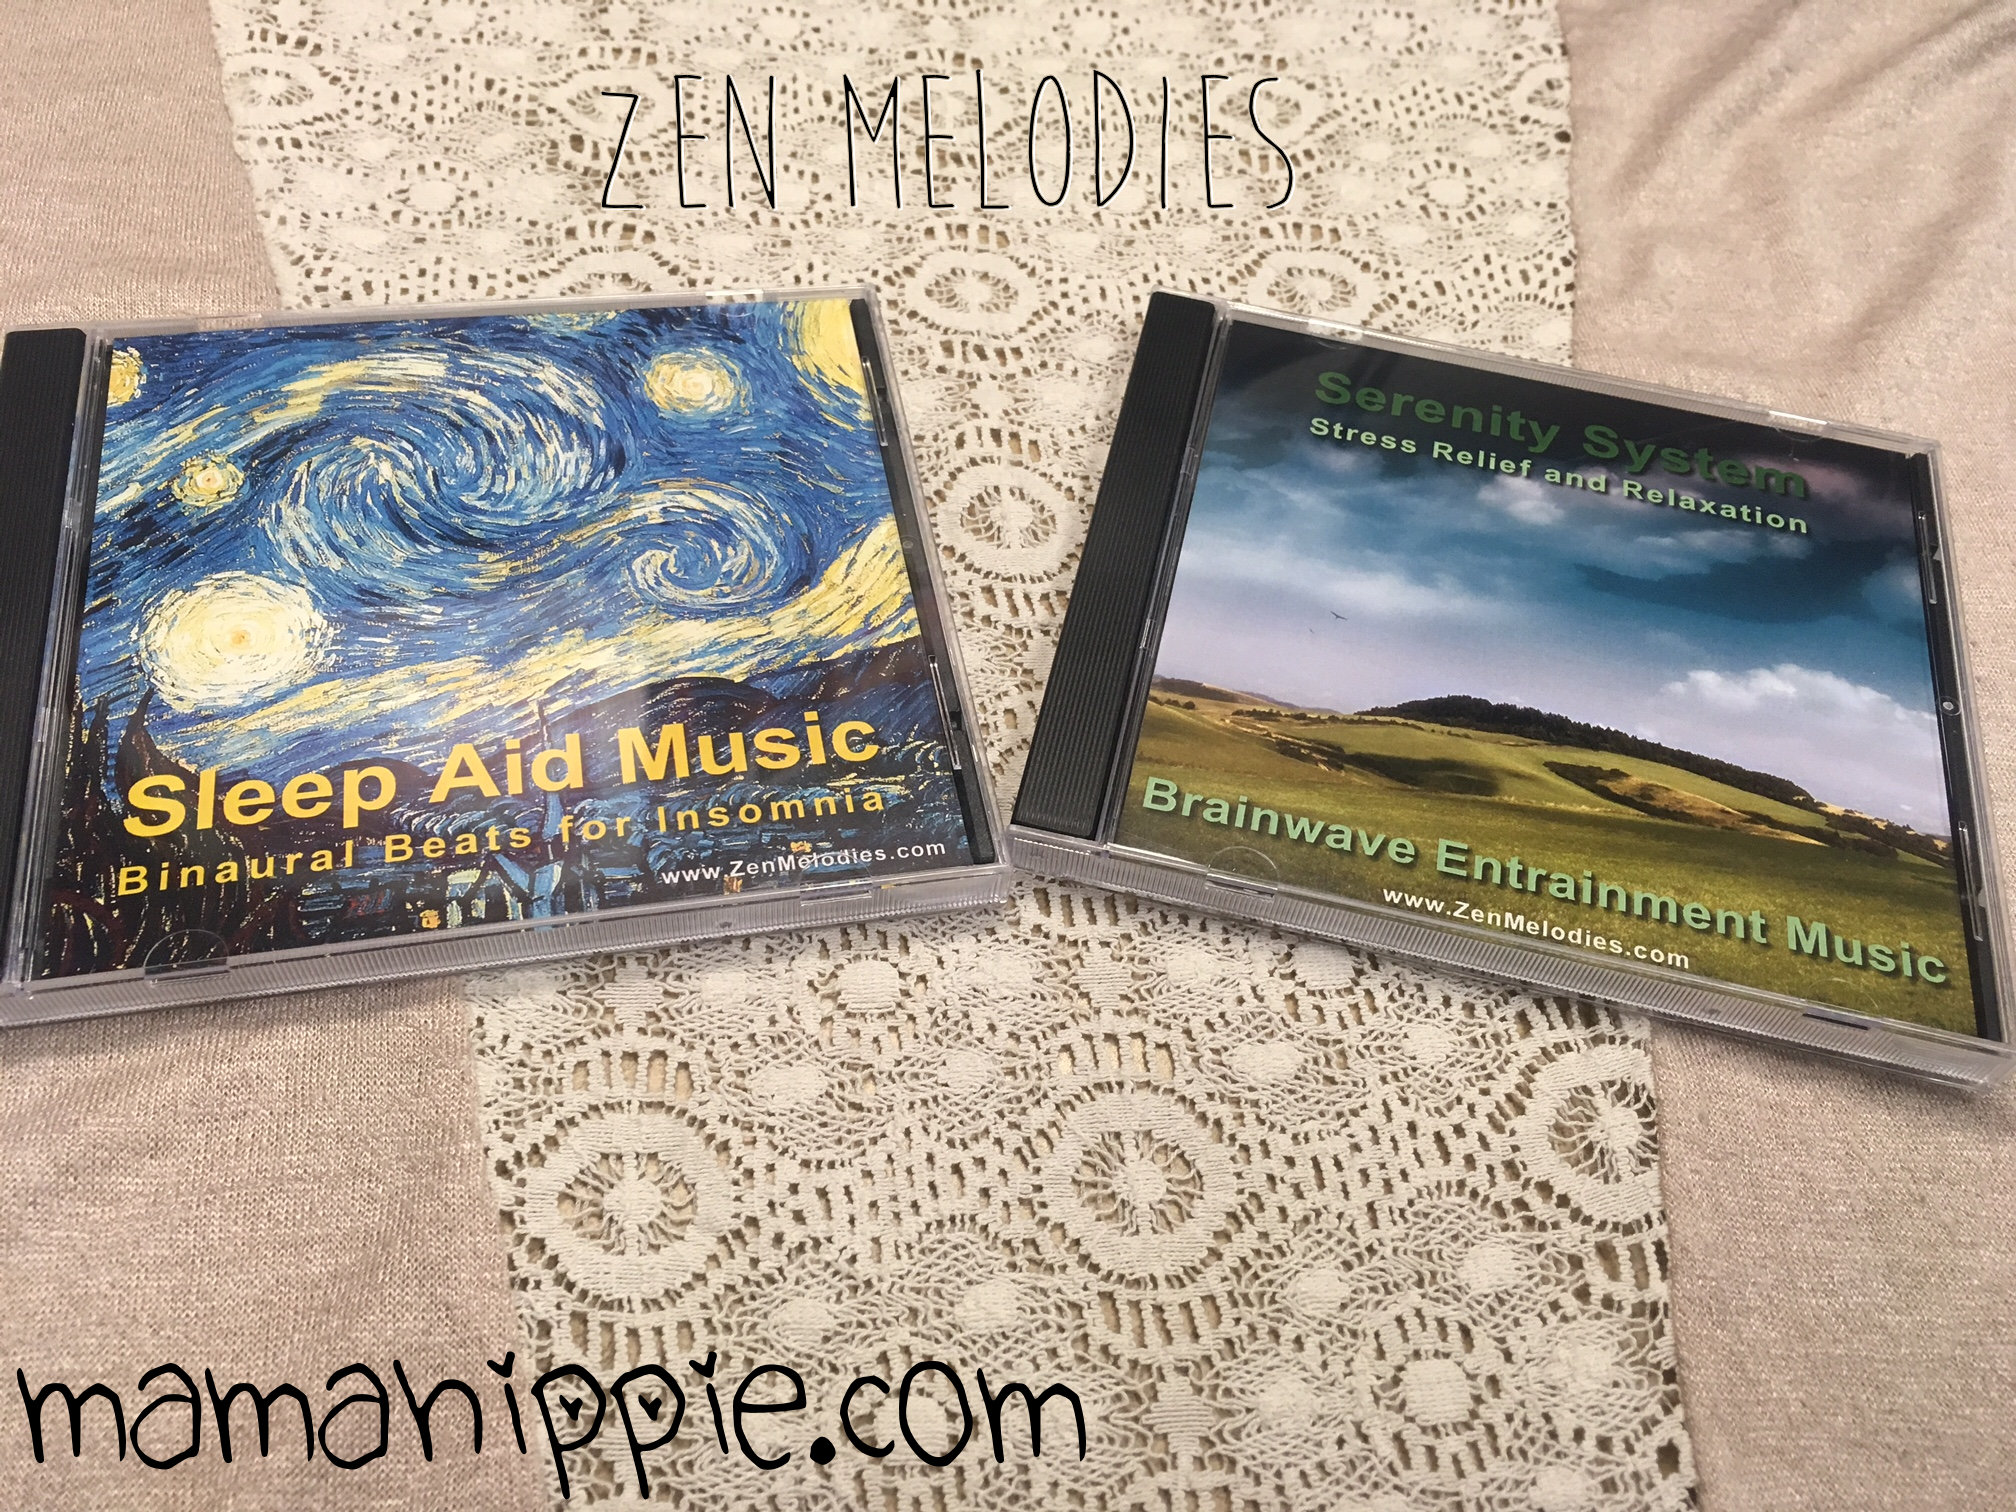 Relax and Unwind with Zen Melodies